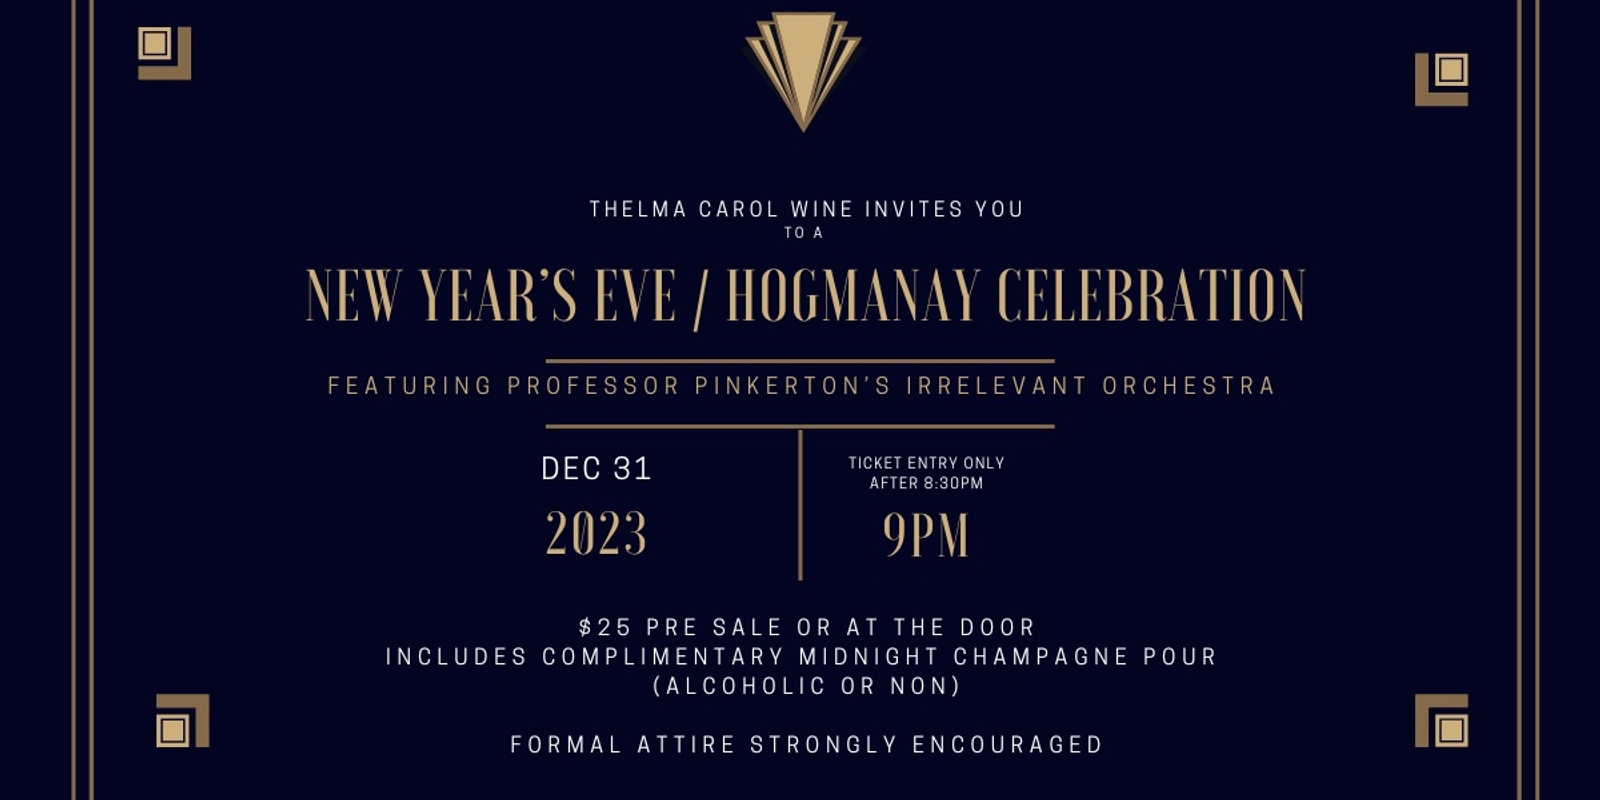 Banner image for New Year's Eve / Hogmanay Celebration with Professor Pinkerton's Irrelevant Orchestra